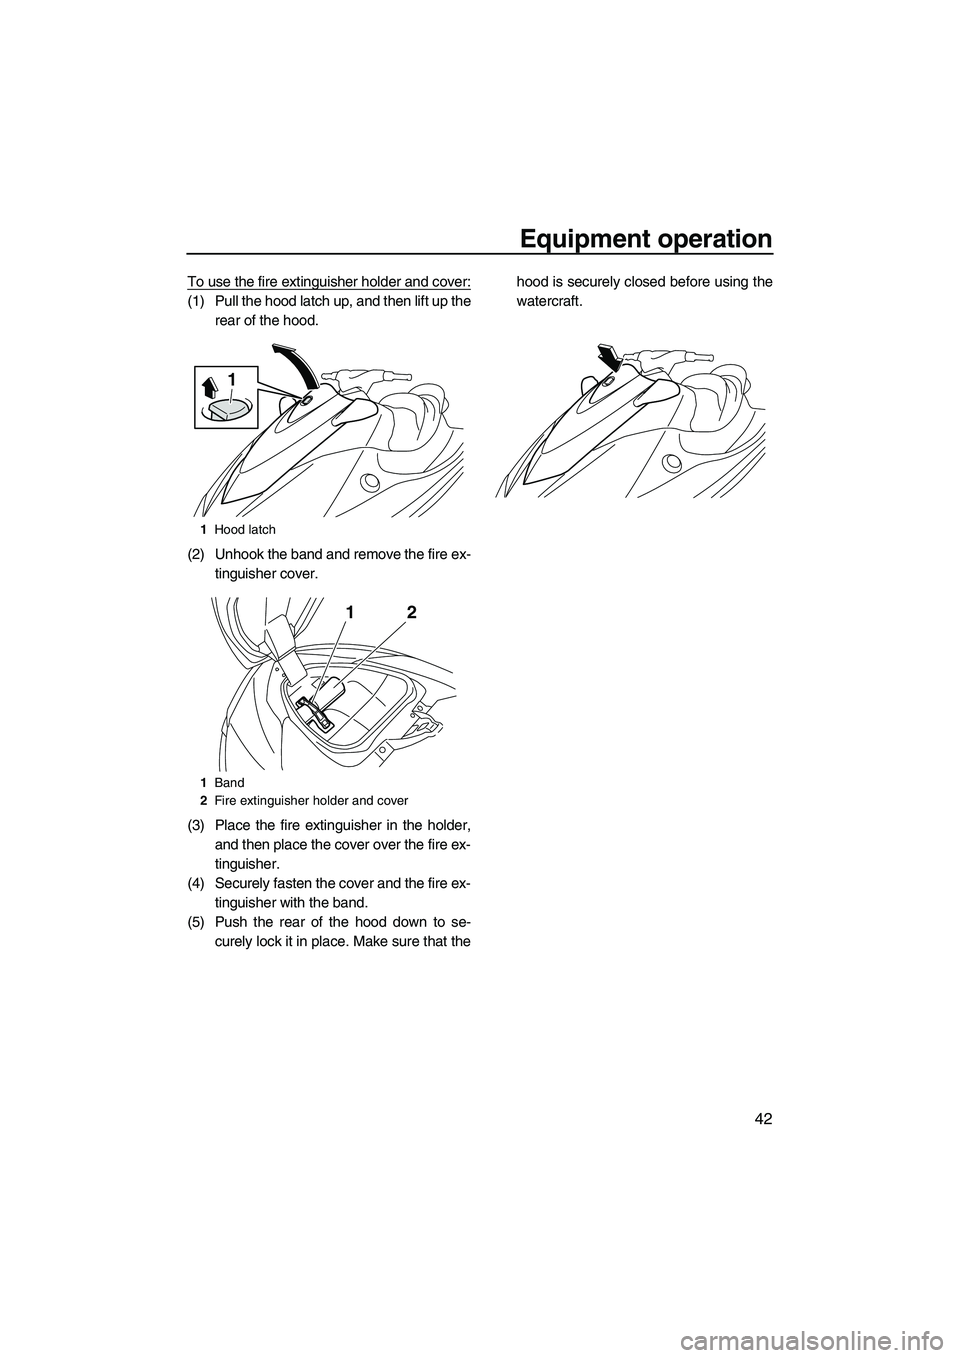 YAMAHA VX SPORT 2010 Service Manual Equipment operation
42
To use the fire extinguisher holder and cover:
(1) Pull the hood latch up, and then lift up the
rear of the hood.
(2) Unhook the band and remove the fire ex-
tinguisher cover.
(